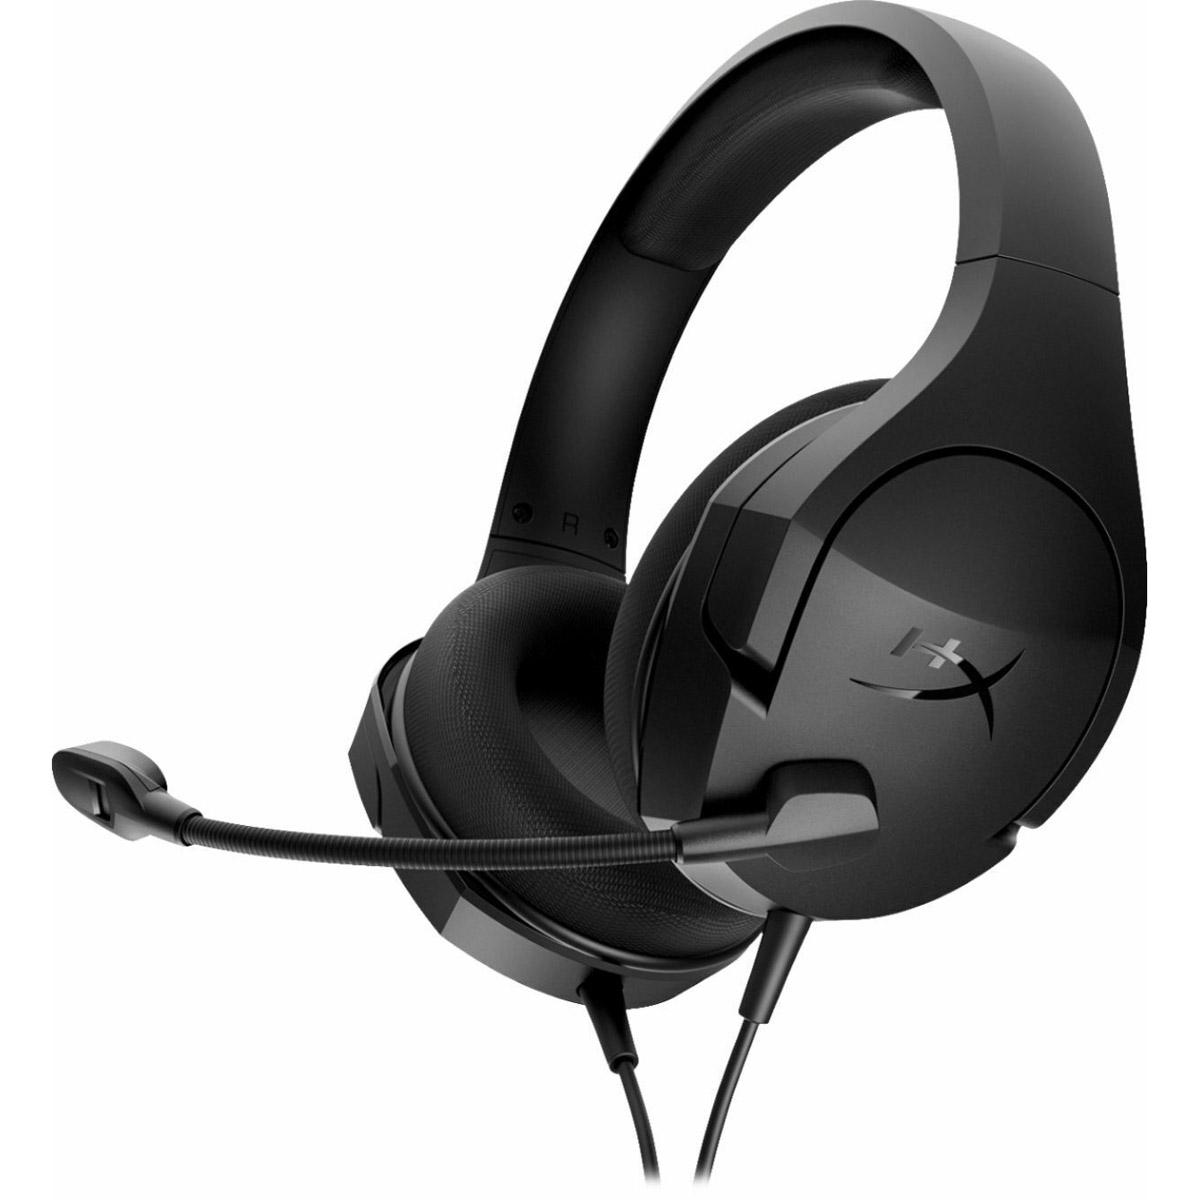 HyperX Cloud Stinger Core Wired Stereo Gaming Headset for $14.99 Shipped